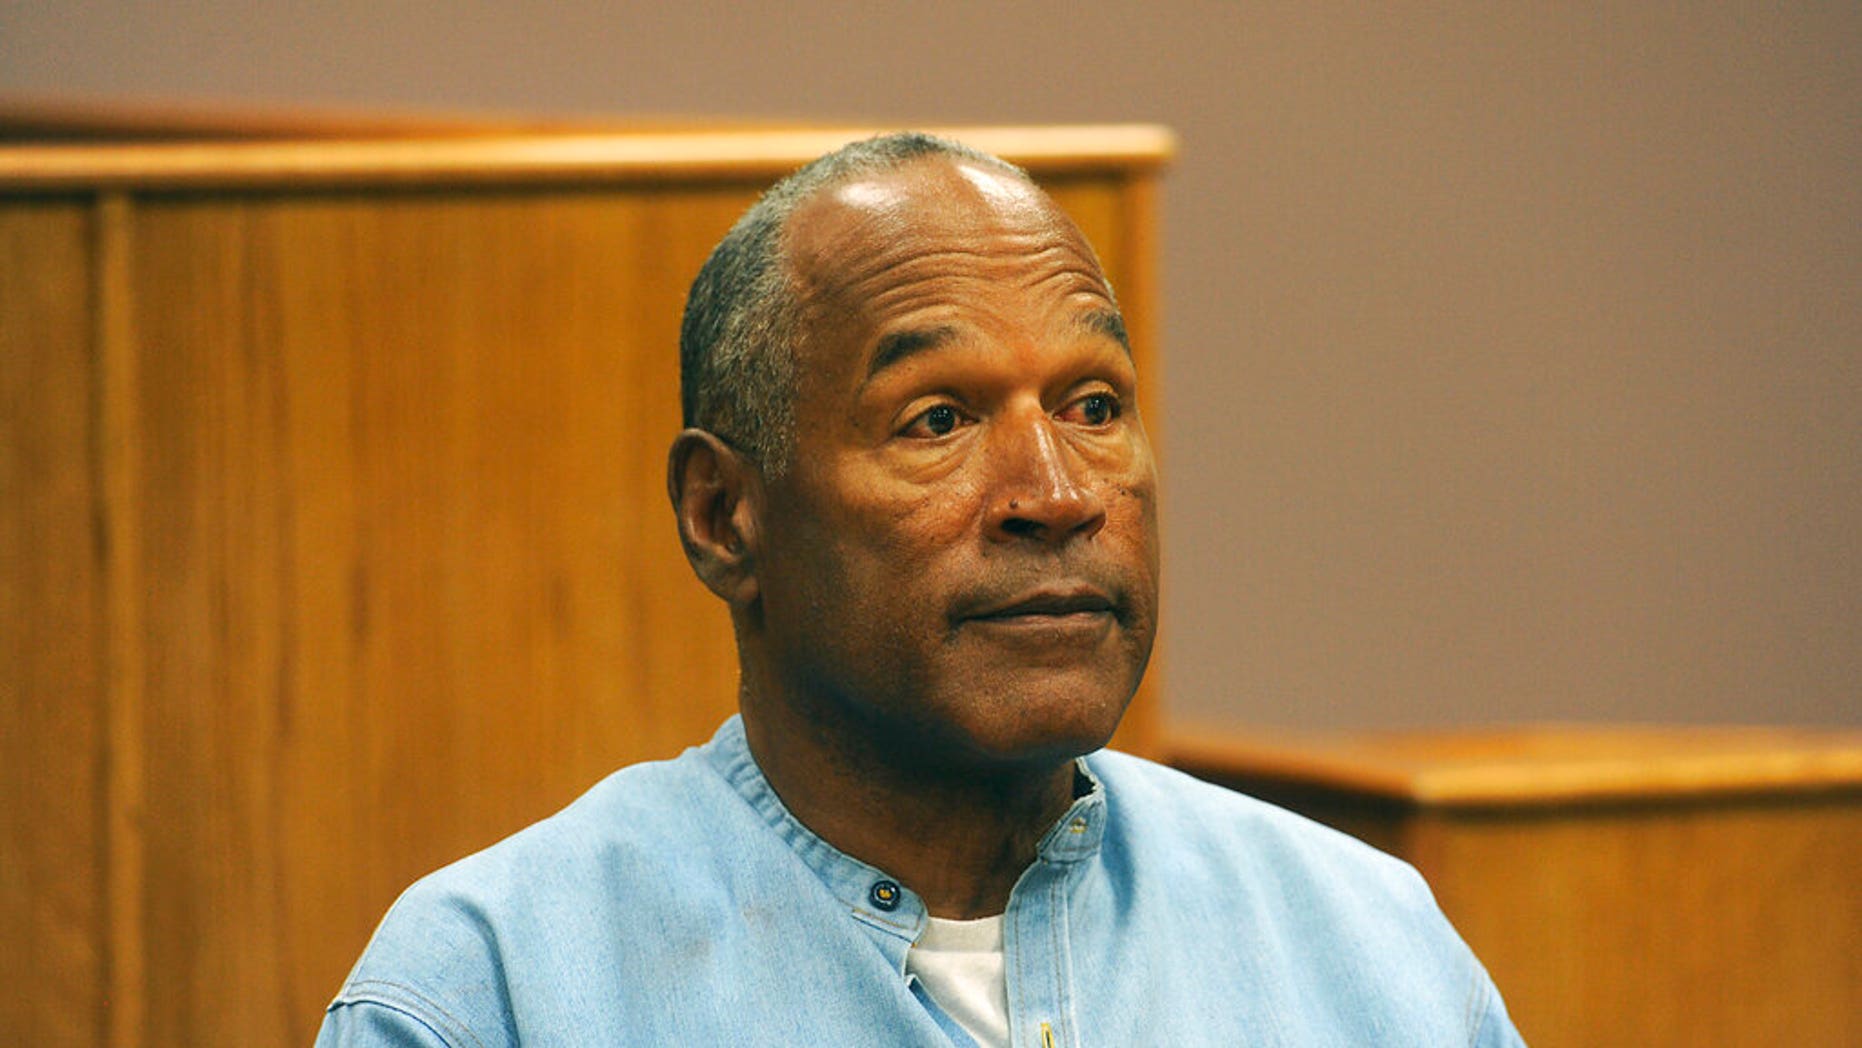 FILE: Former NFL football star O.J. Simpson appears via video for his parole hearing at the Lovelock Correctional Center in Lovelock, Nev. 